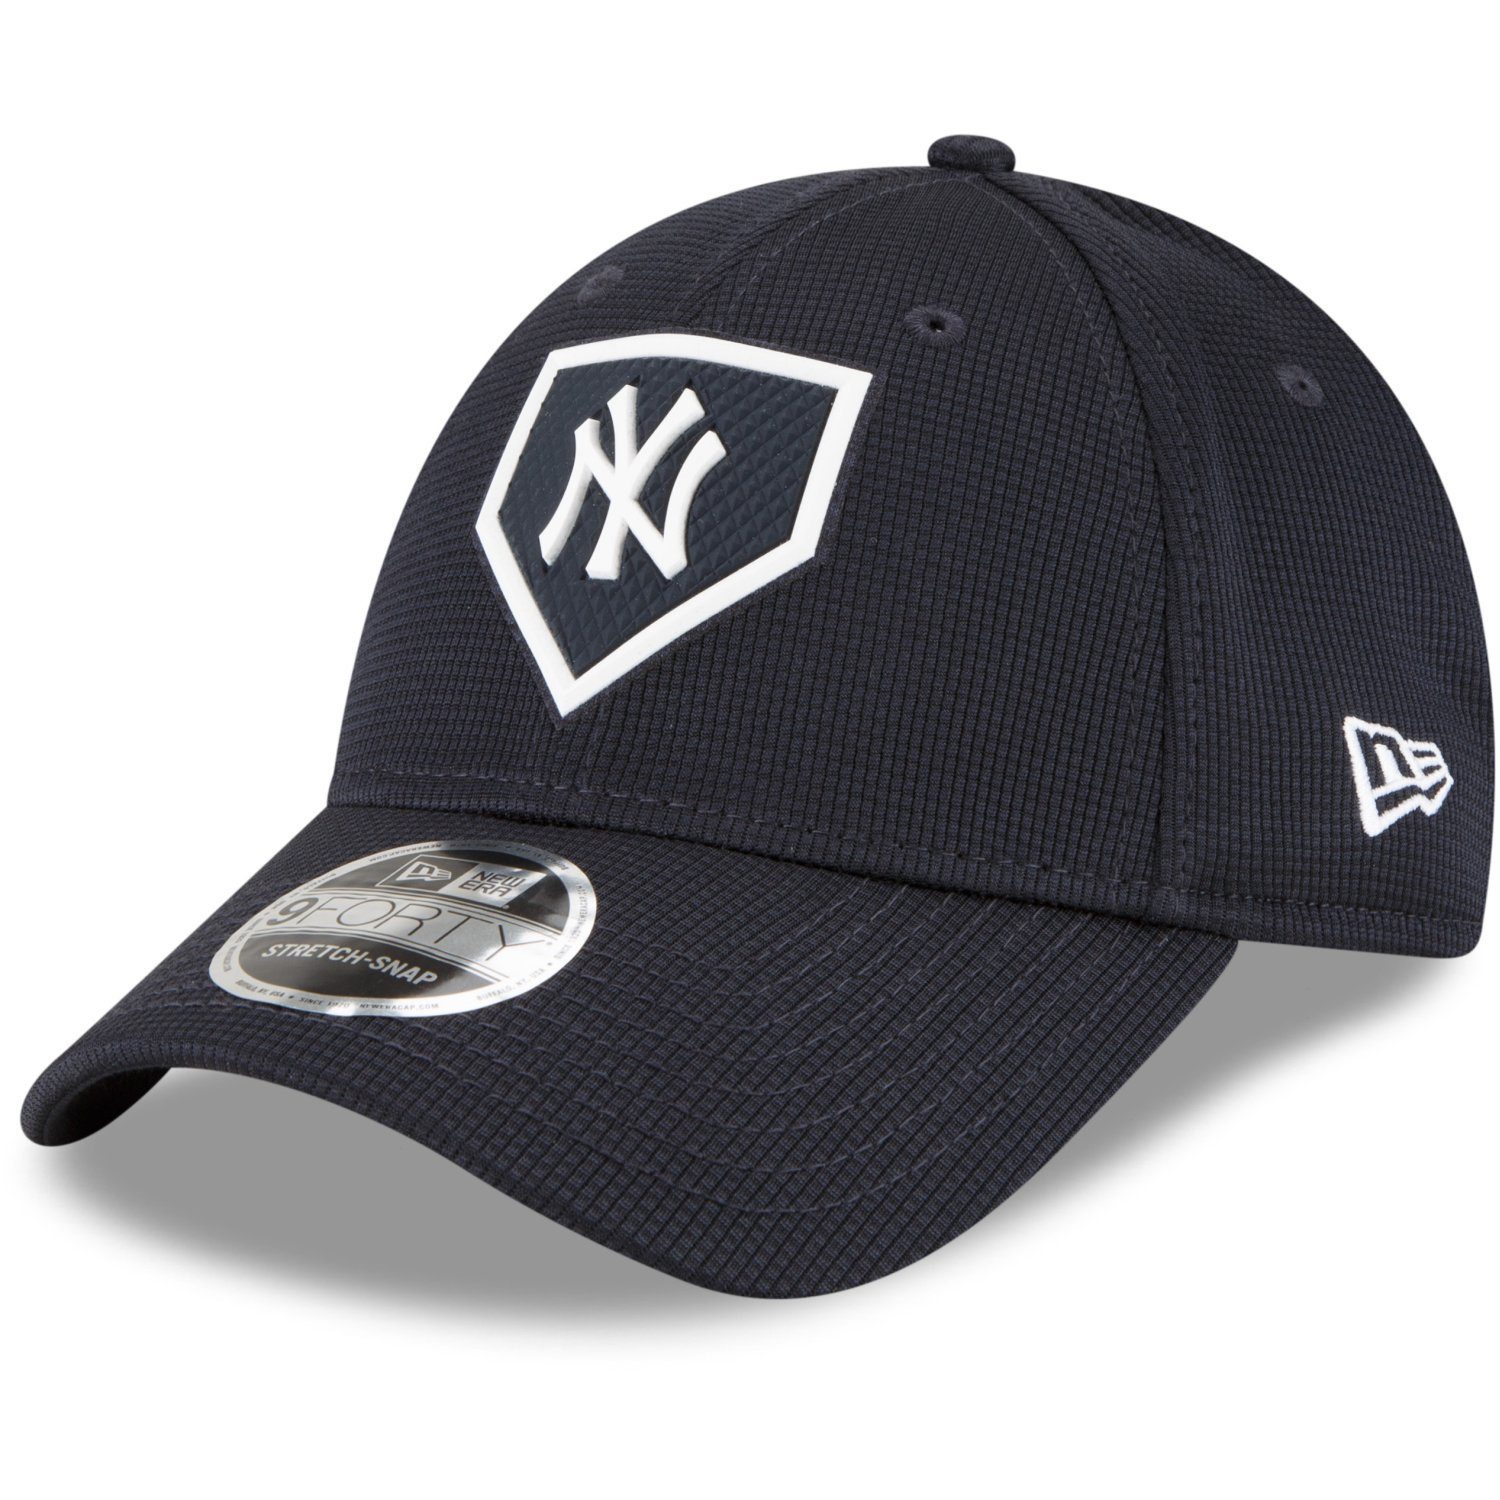 Cap Fitted New New 2022 CLUBHOUSE Era 9FORTY Yankees York MLB StretchFit